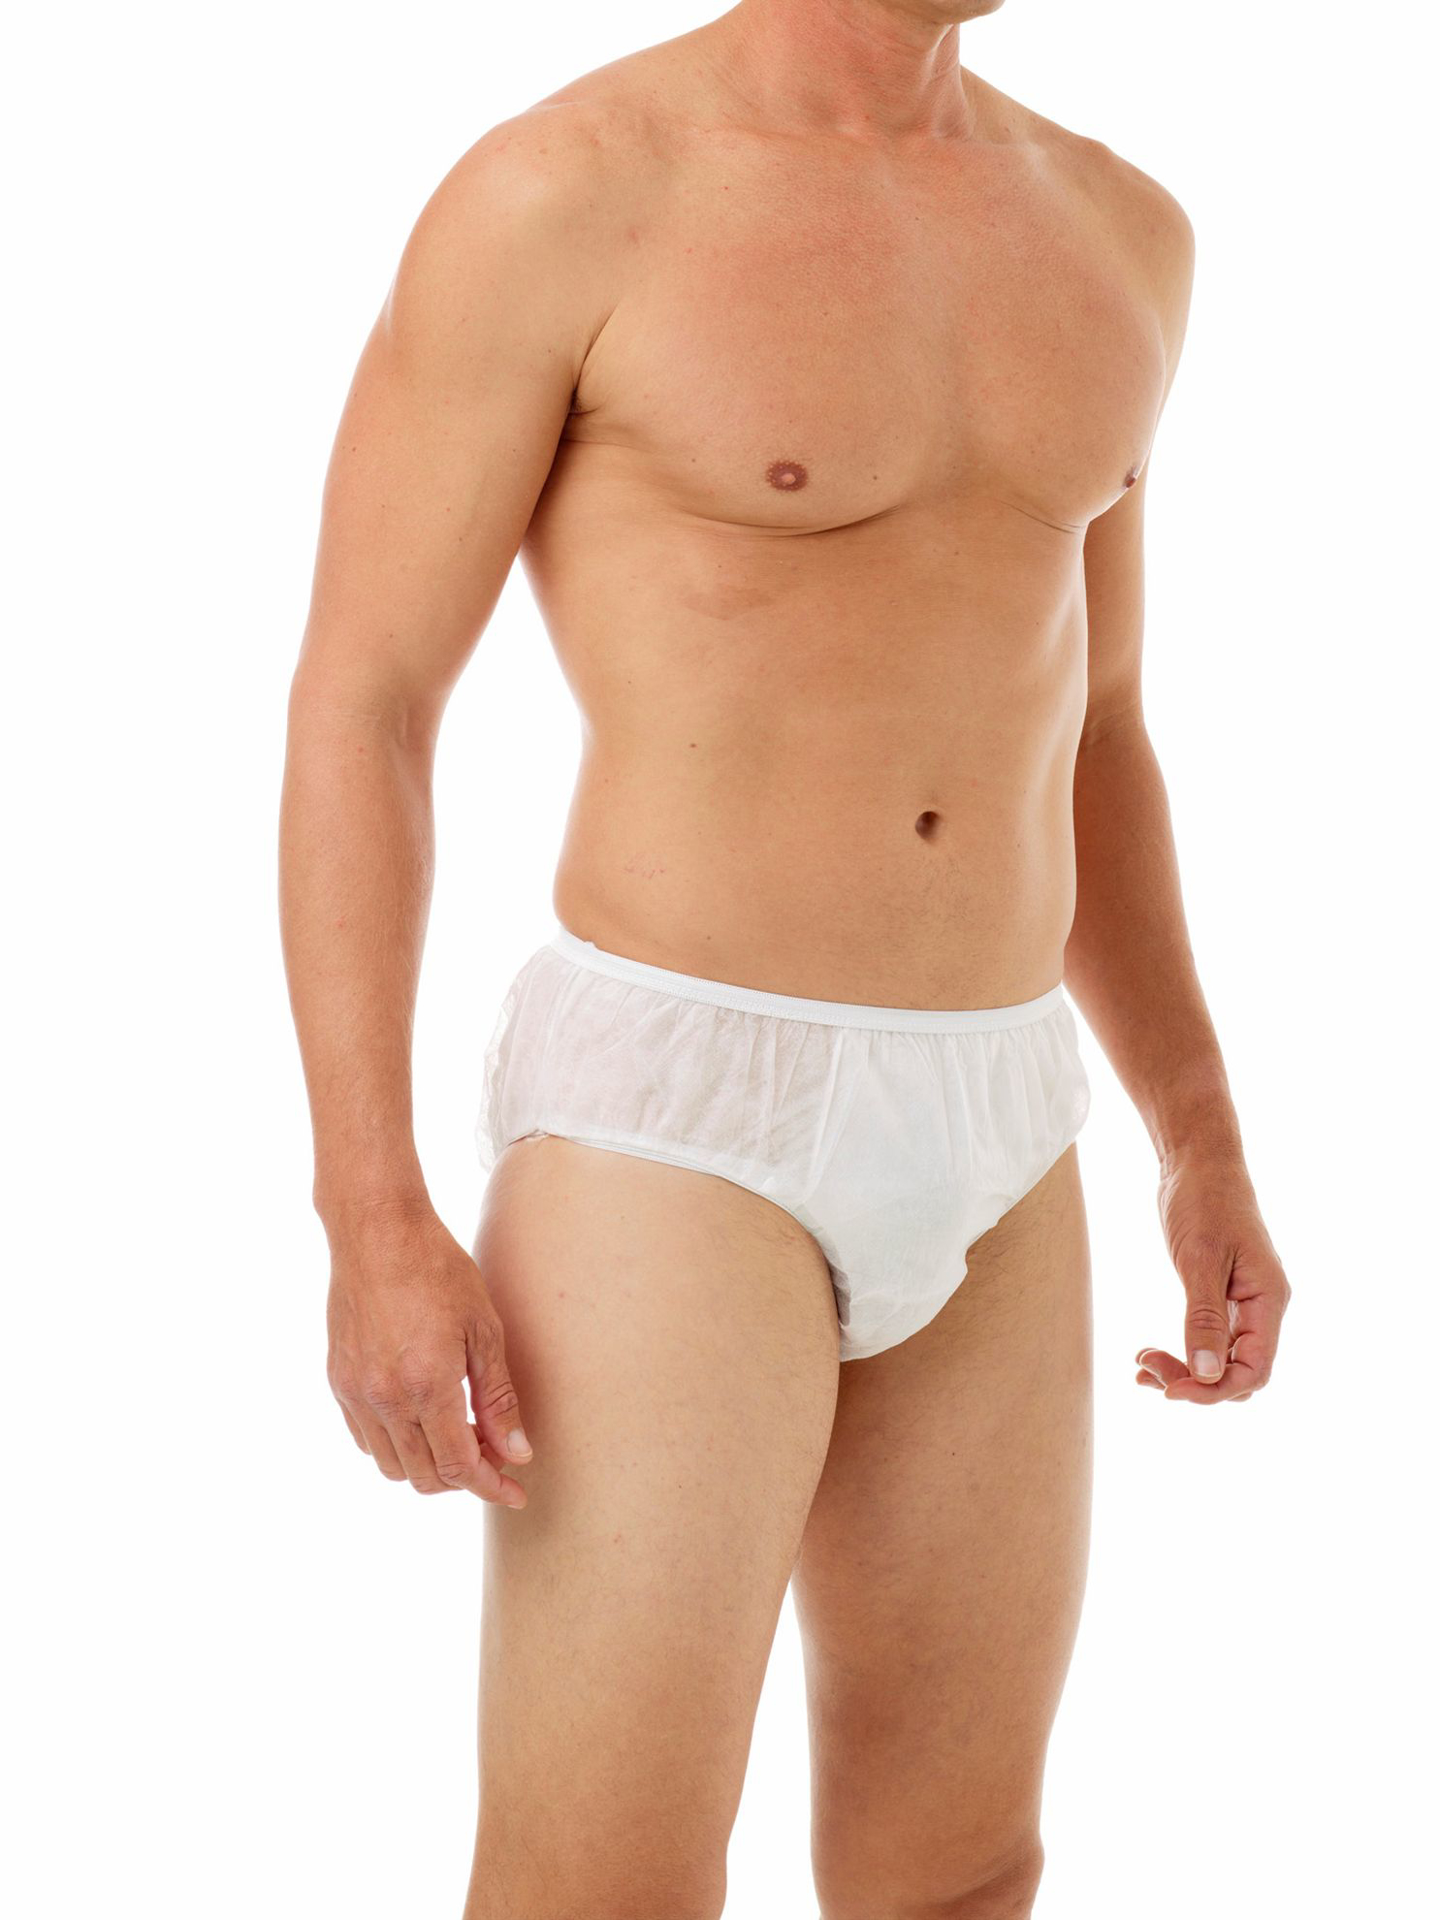 https://www.underworks.com/images/thumbs/0000080_mens-disposable-briefs-10-pack.jpeg